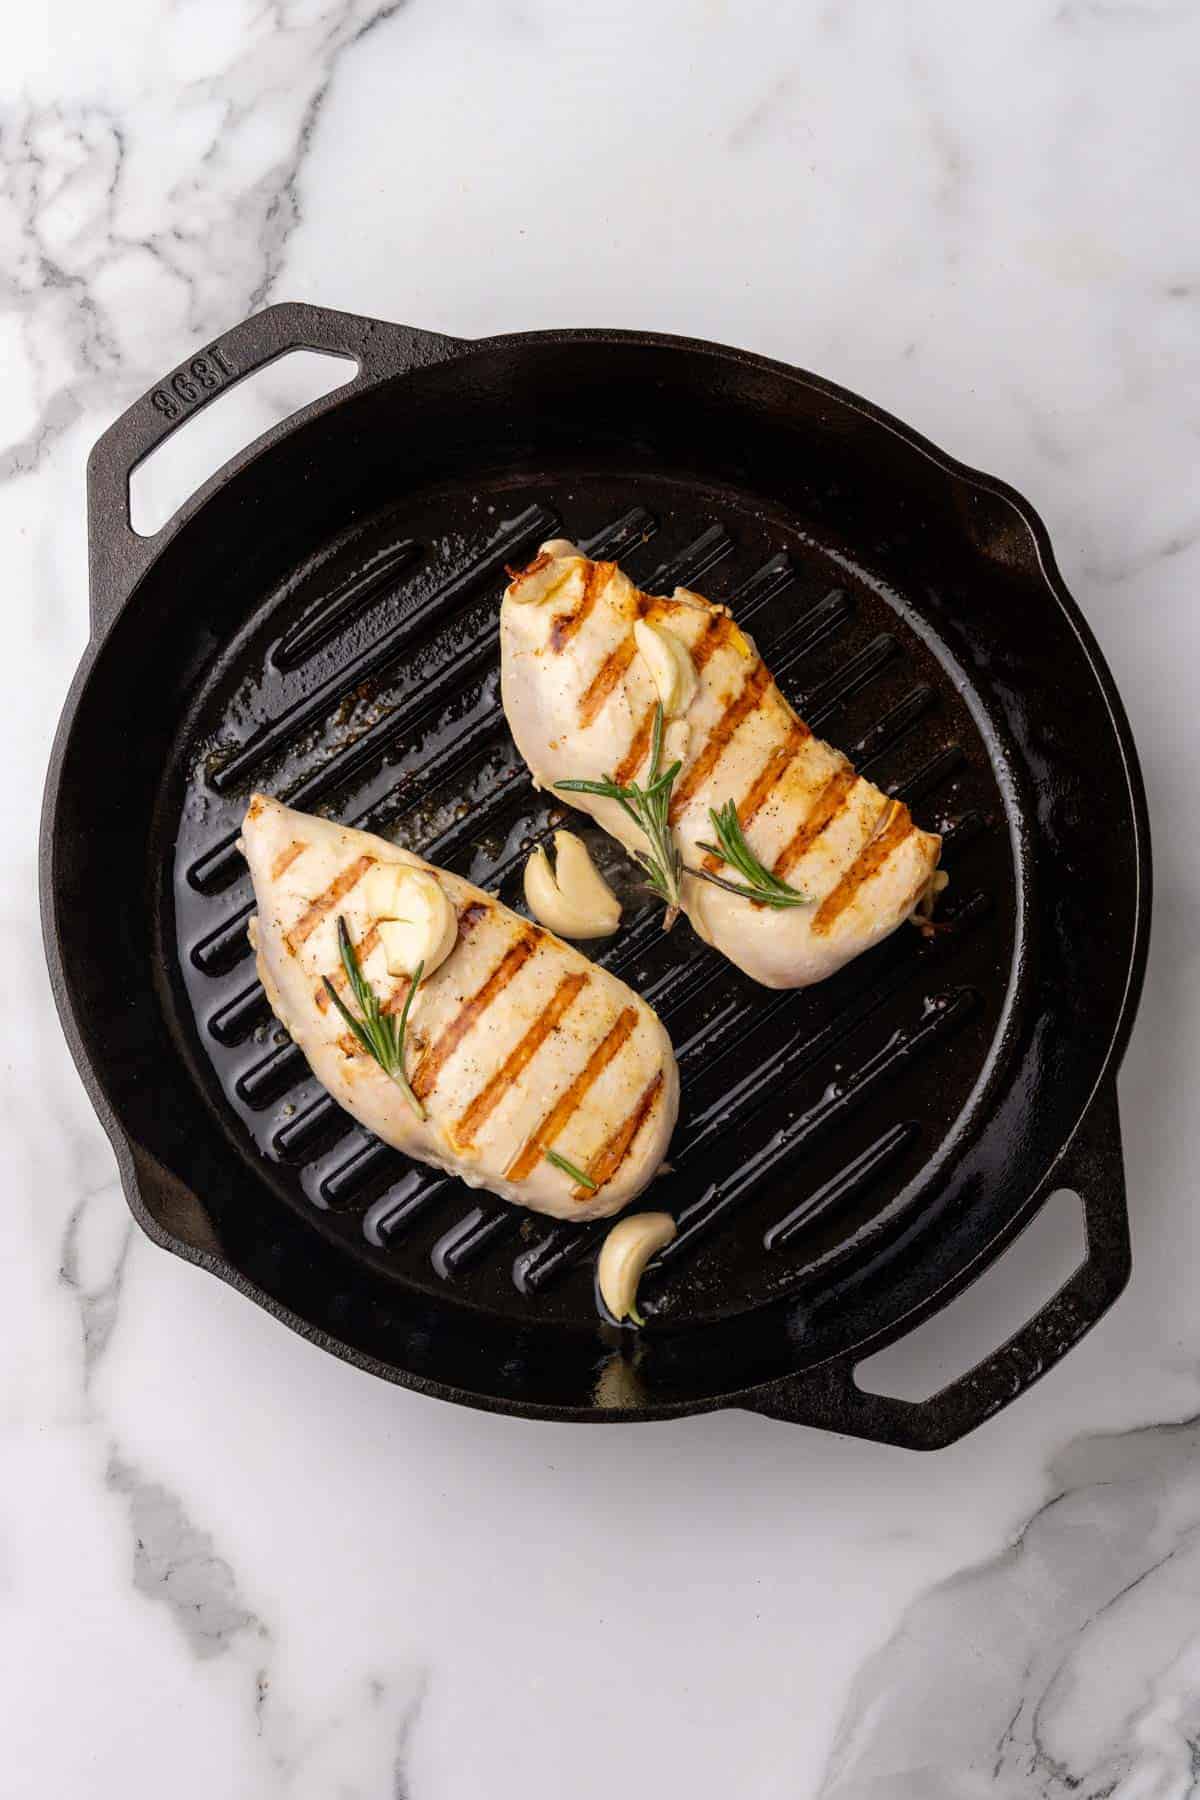 Chicken breasts flipped on the black grill plan so yo can see the grill marks on the side facing up; garlic cloves and rosemary sprigs on top